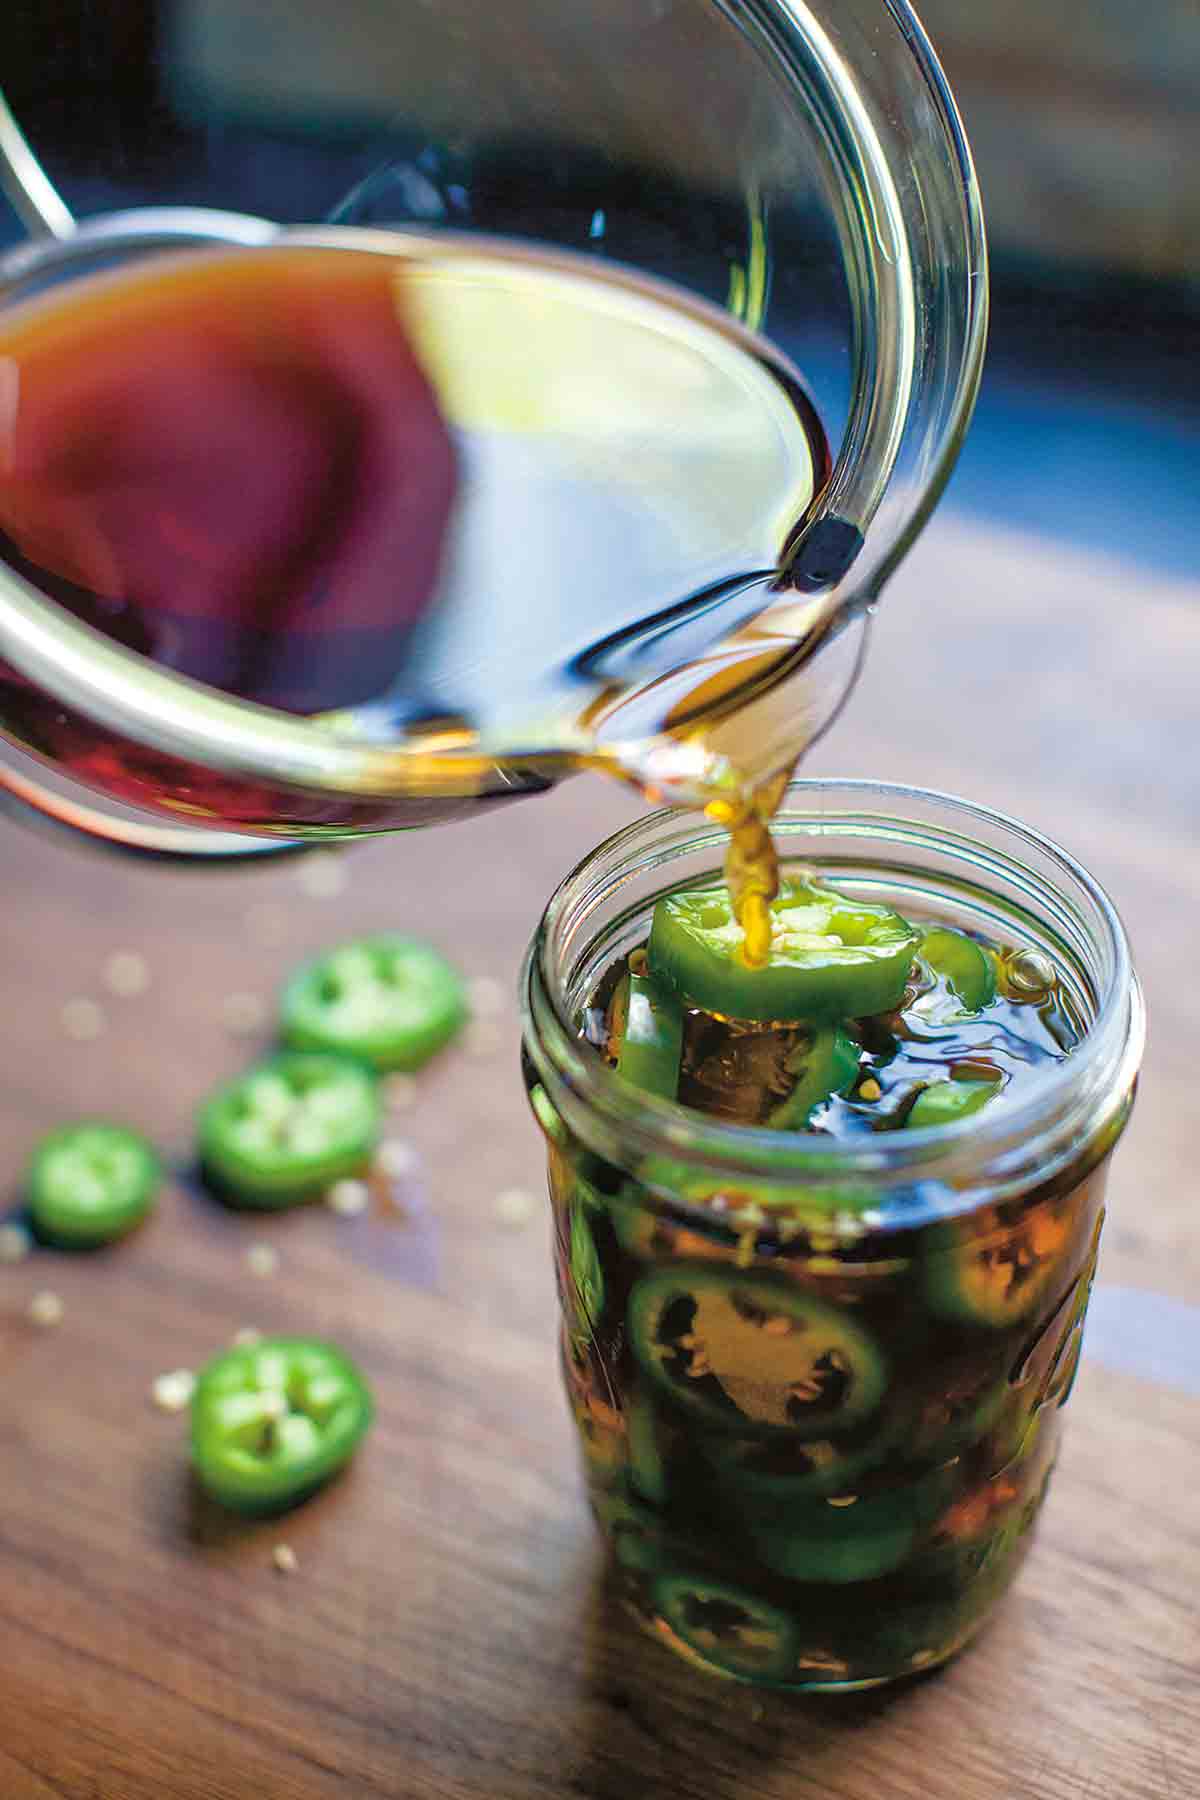 Pickling liquid being poured into a full jar of pickled jalapeno peppers.